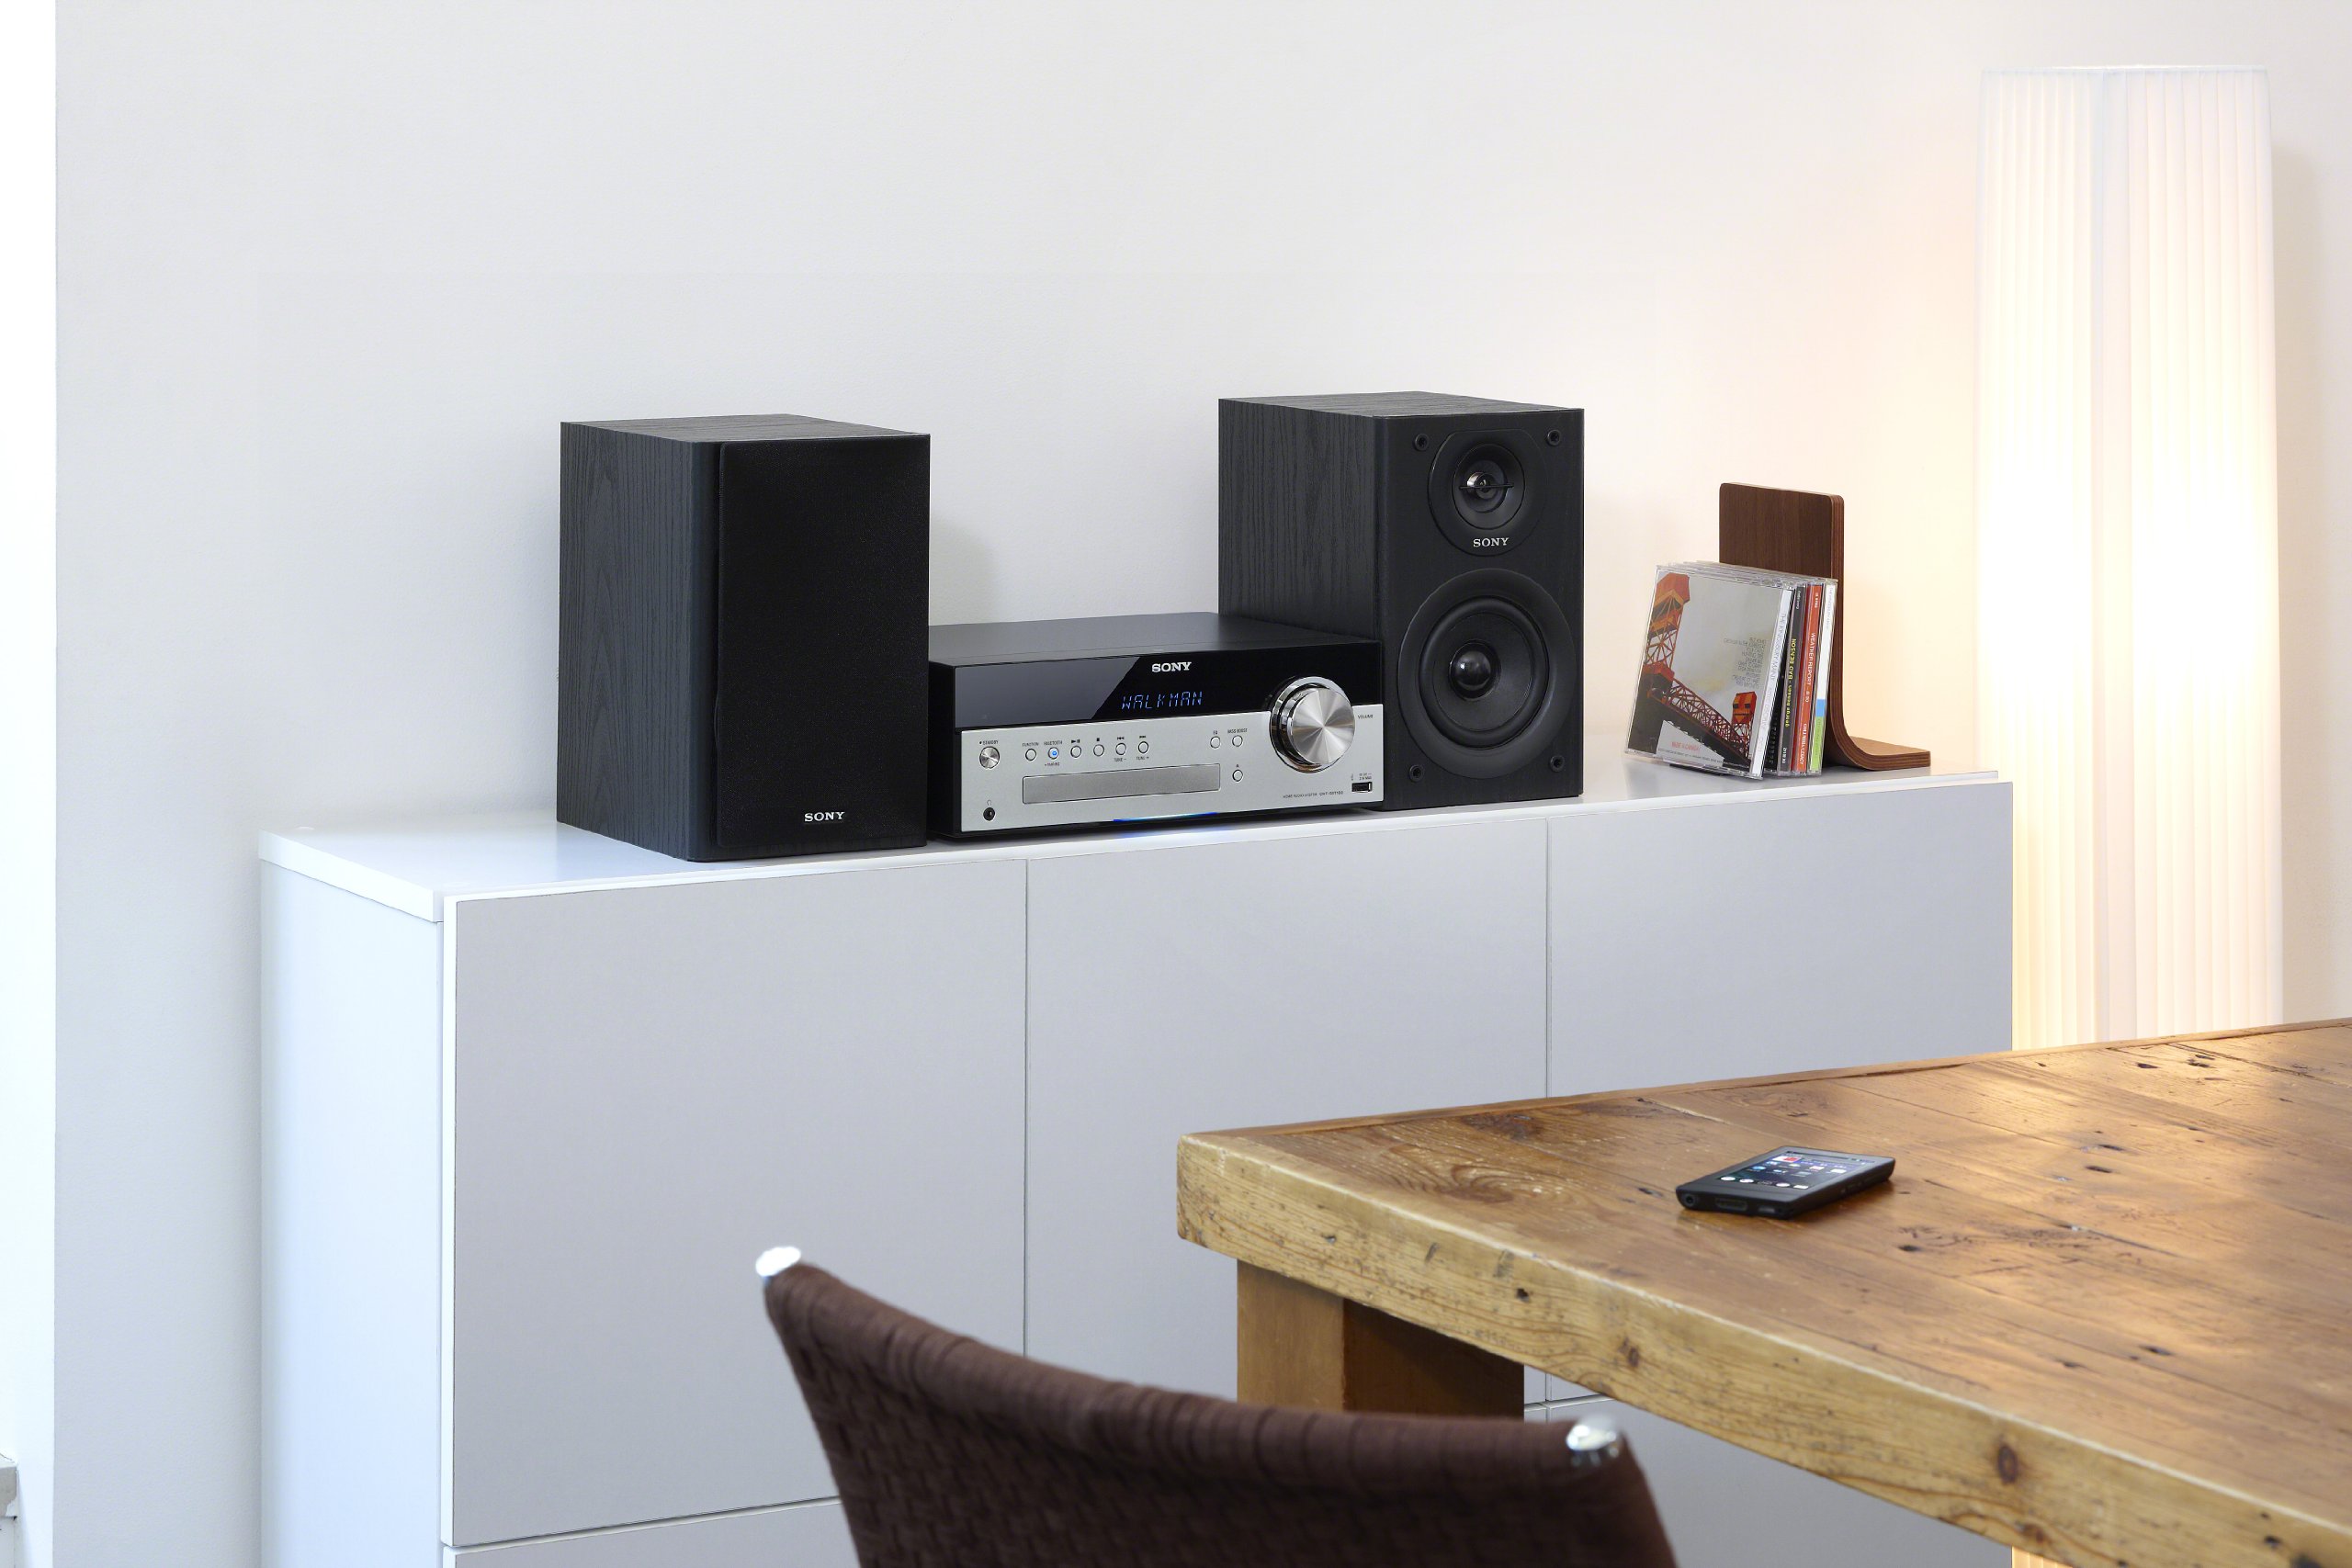 Exploring Compact Sound Systems: Sony CMT-SBT100 Micro Music System